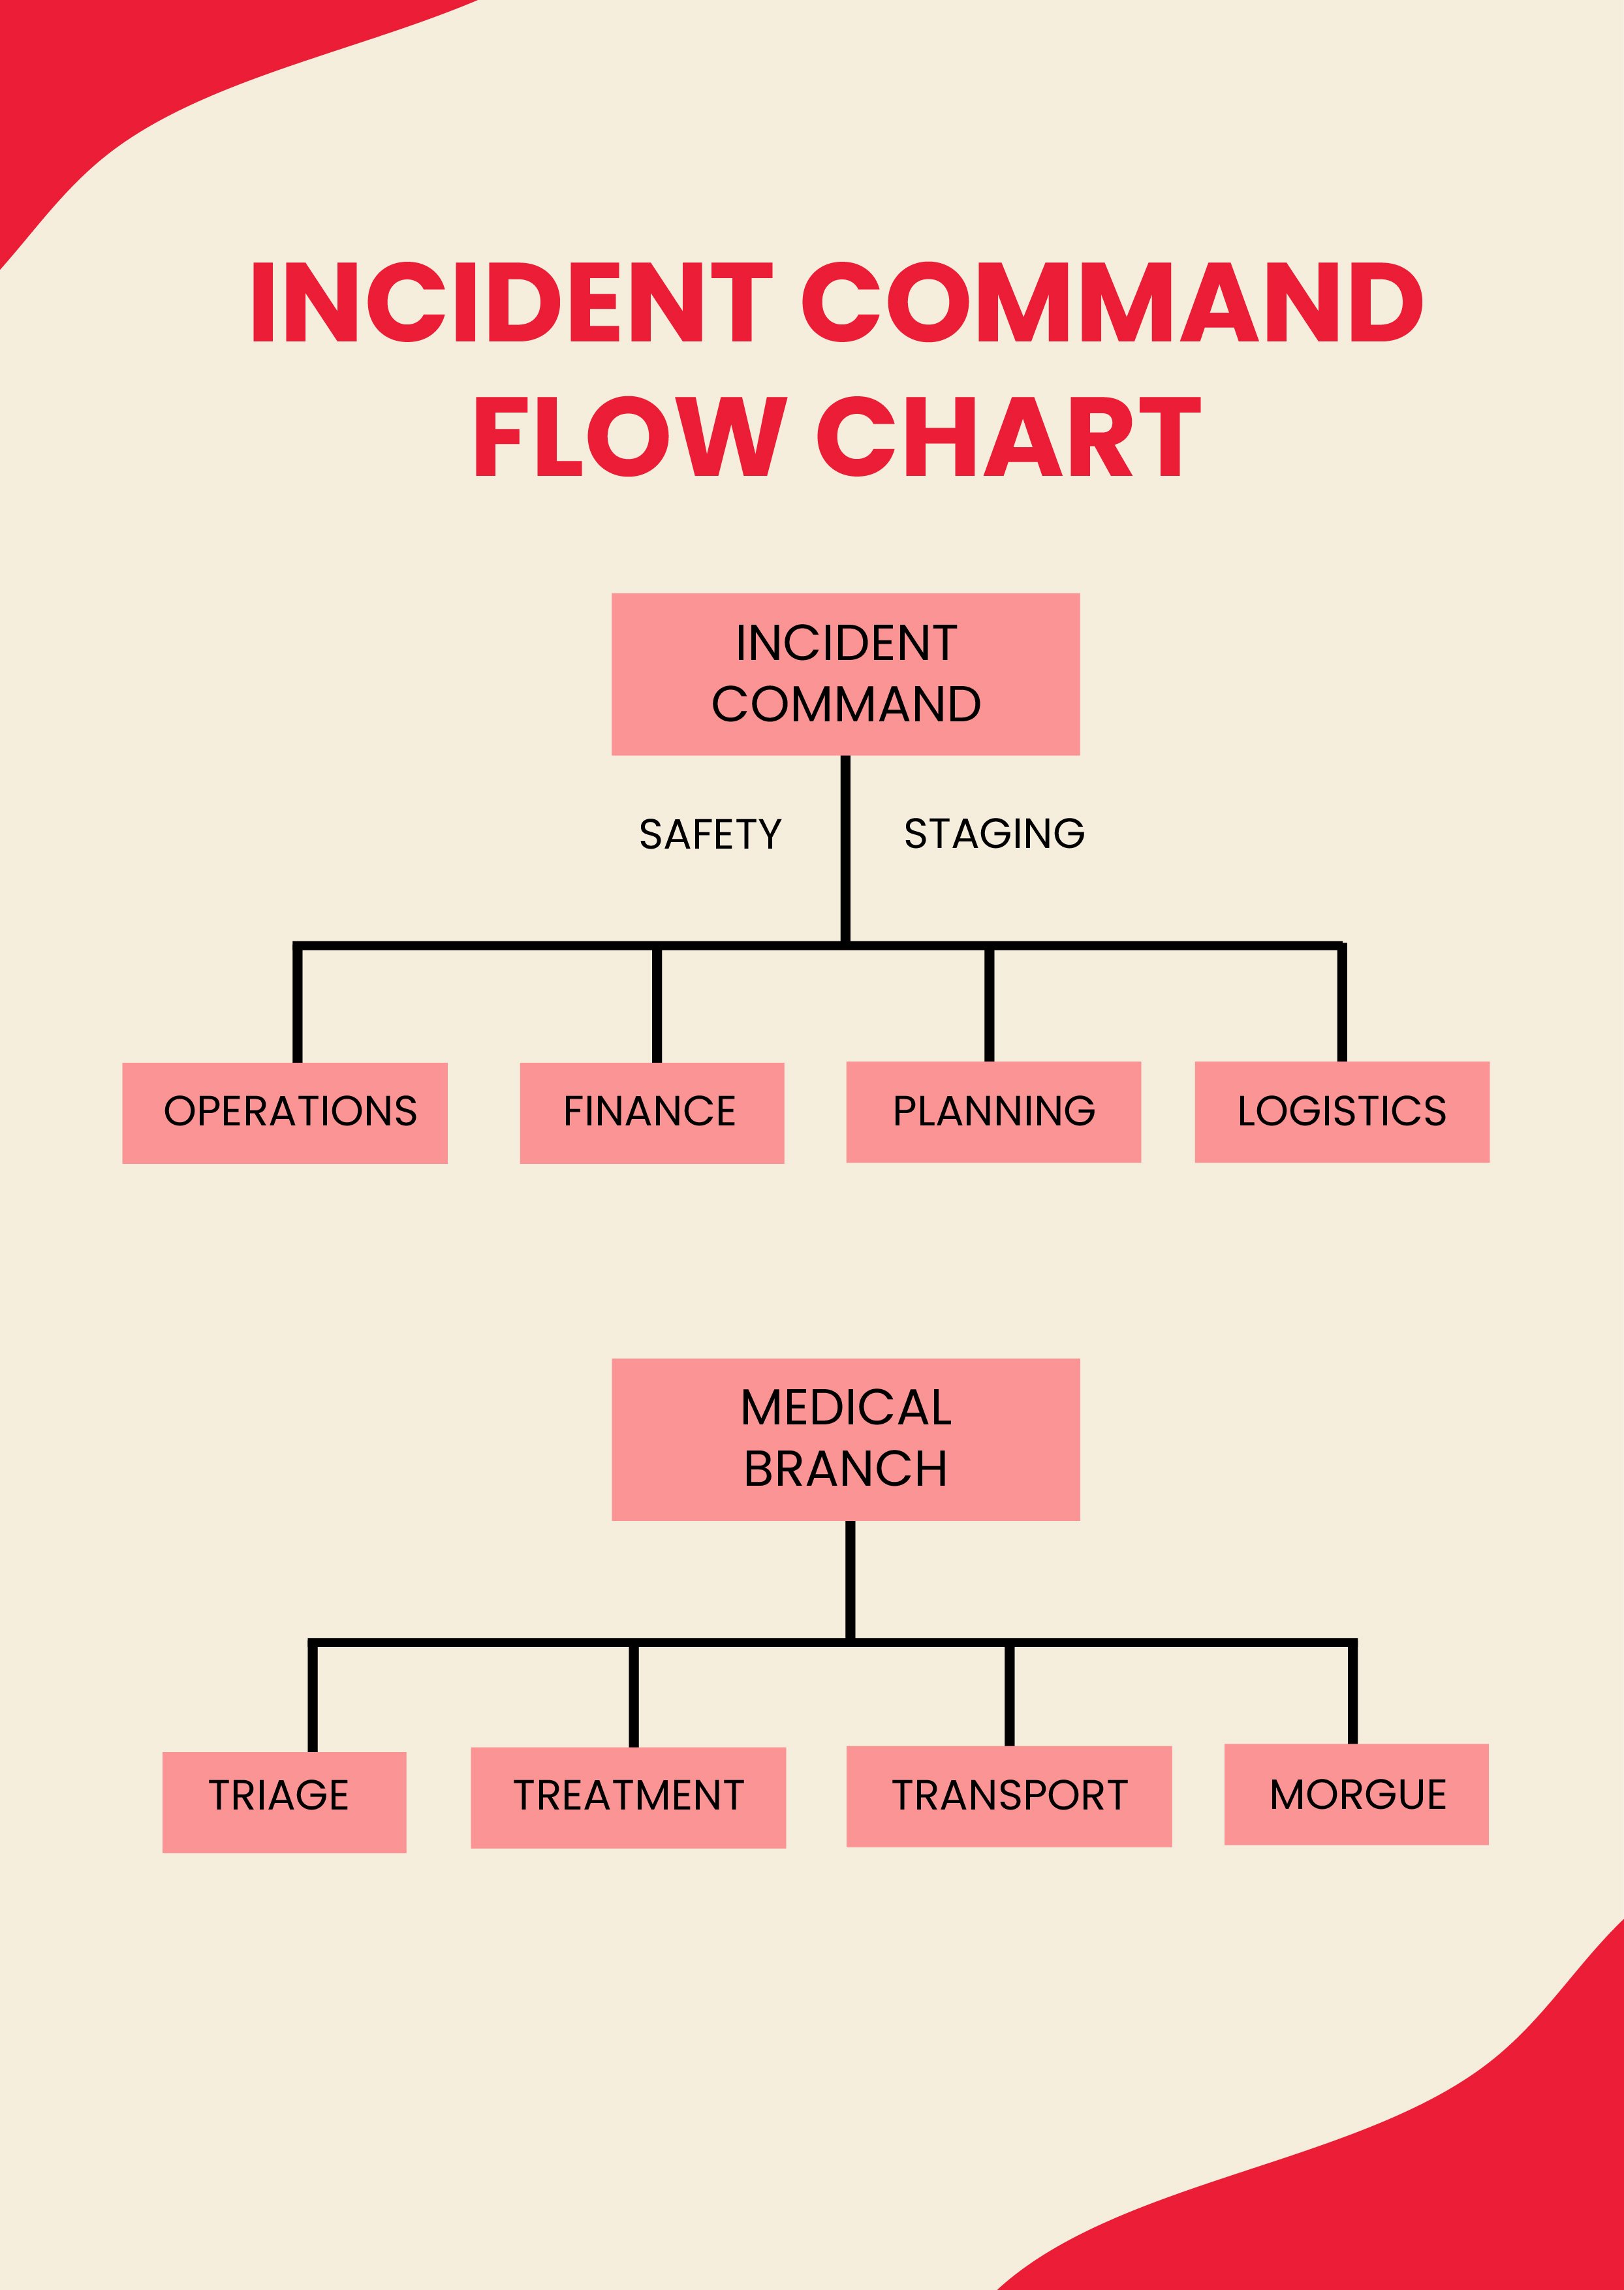 FREE Incident Flow Chart Template Download in PDF Illustrator